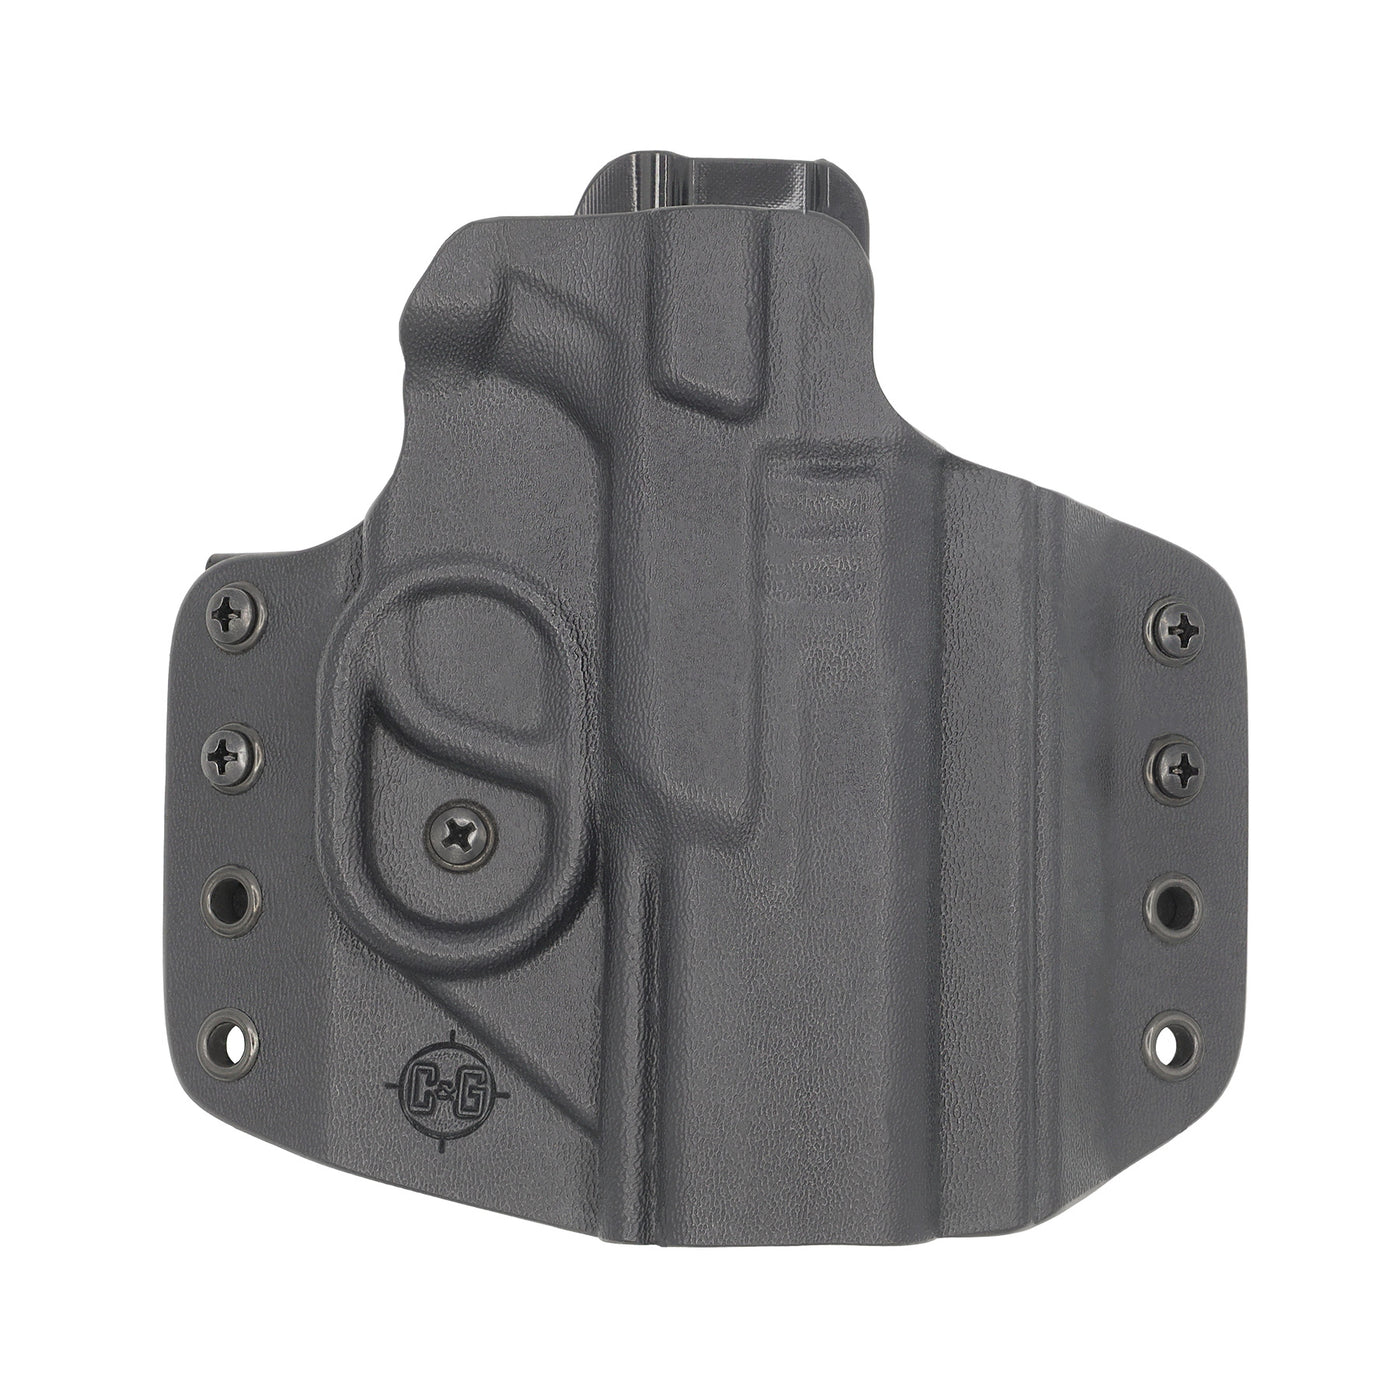 C&G Holsters quickship OWB Covert S&W M&P 10mm 4"